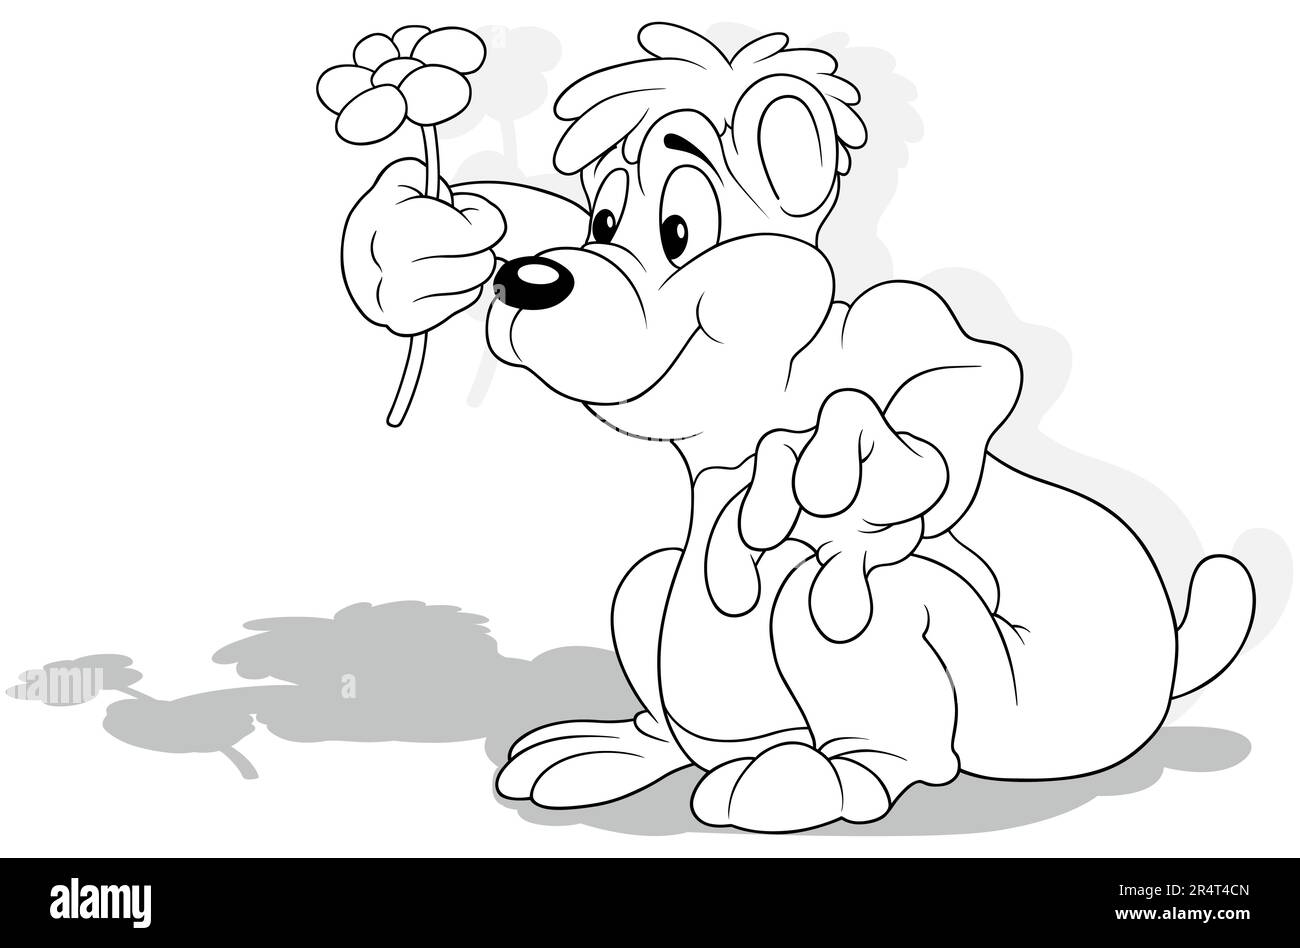 Drawing of a Cute Sitting Teddy Bear with a Flower Stock Vector